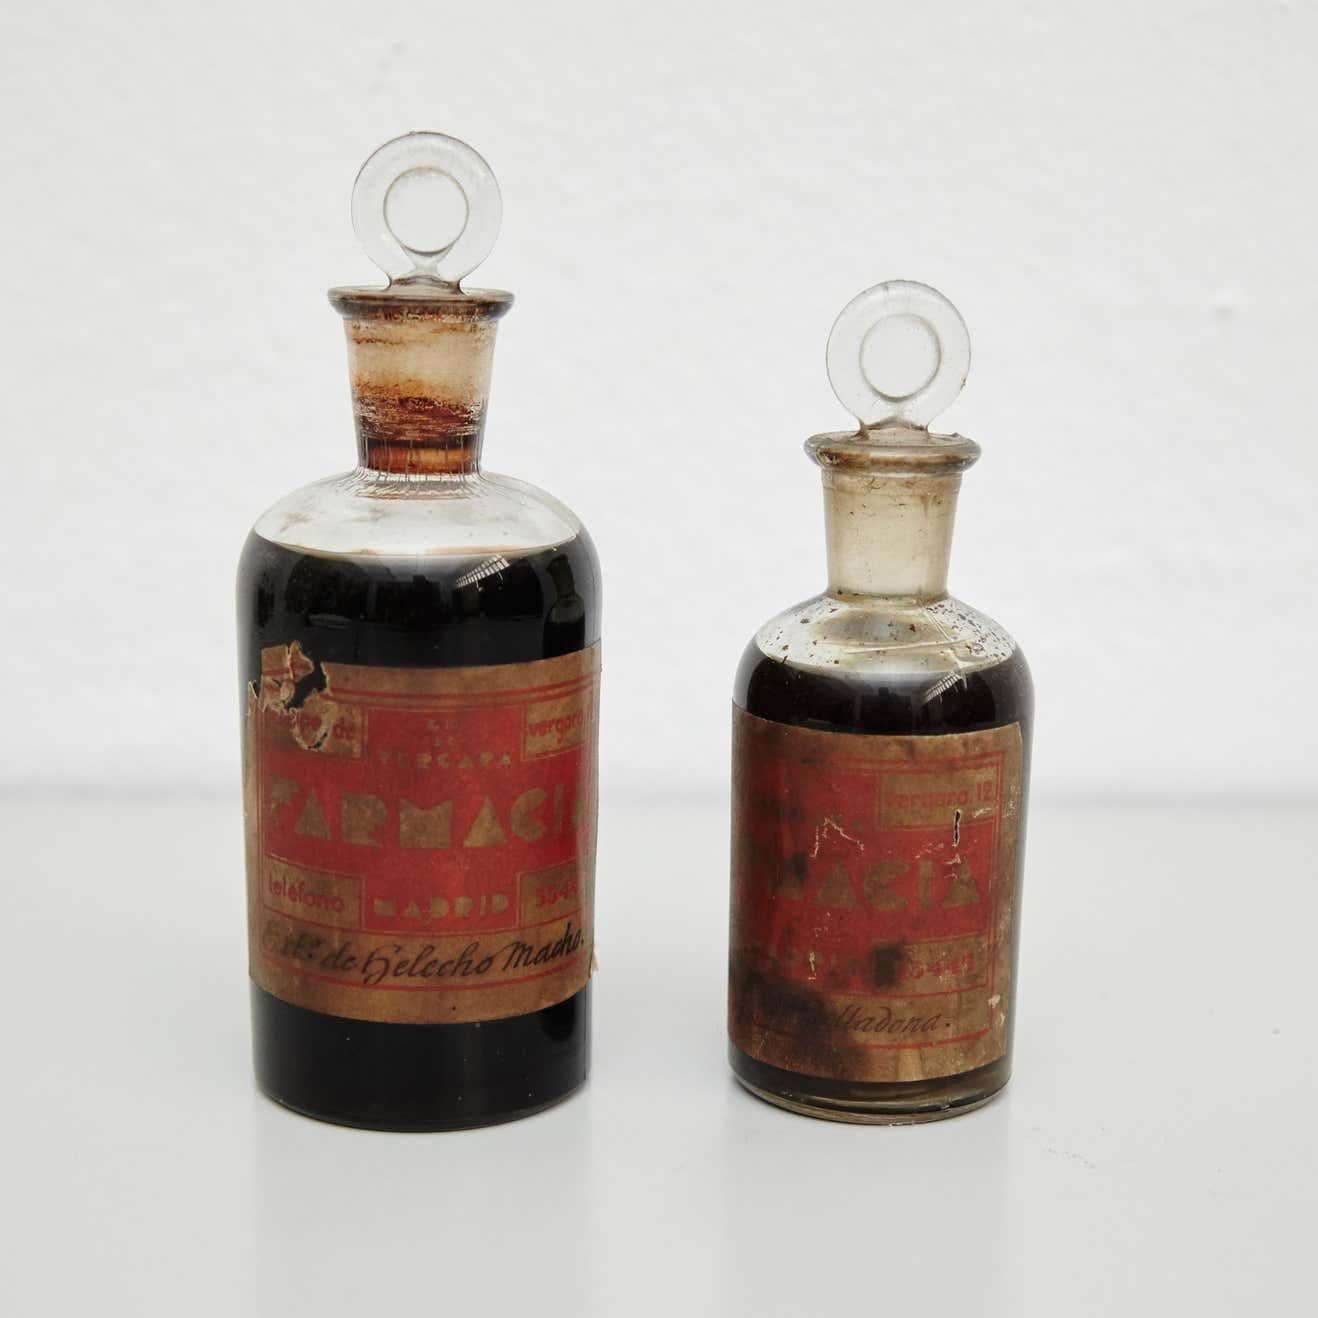 Early 20th century set of vintage rustic glass apothecary bottles.
By unknown manufacturer, Spain.

In original condition, with minor wear consistent with age and use, preserving a beautiful patina.

Materials:
Glass

Dimensions:
Large: ø